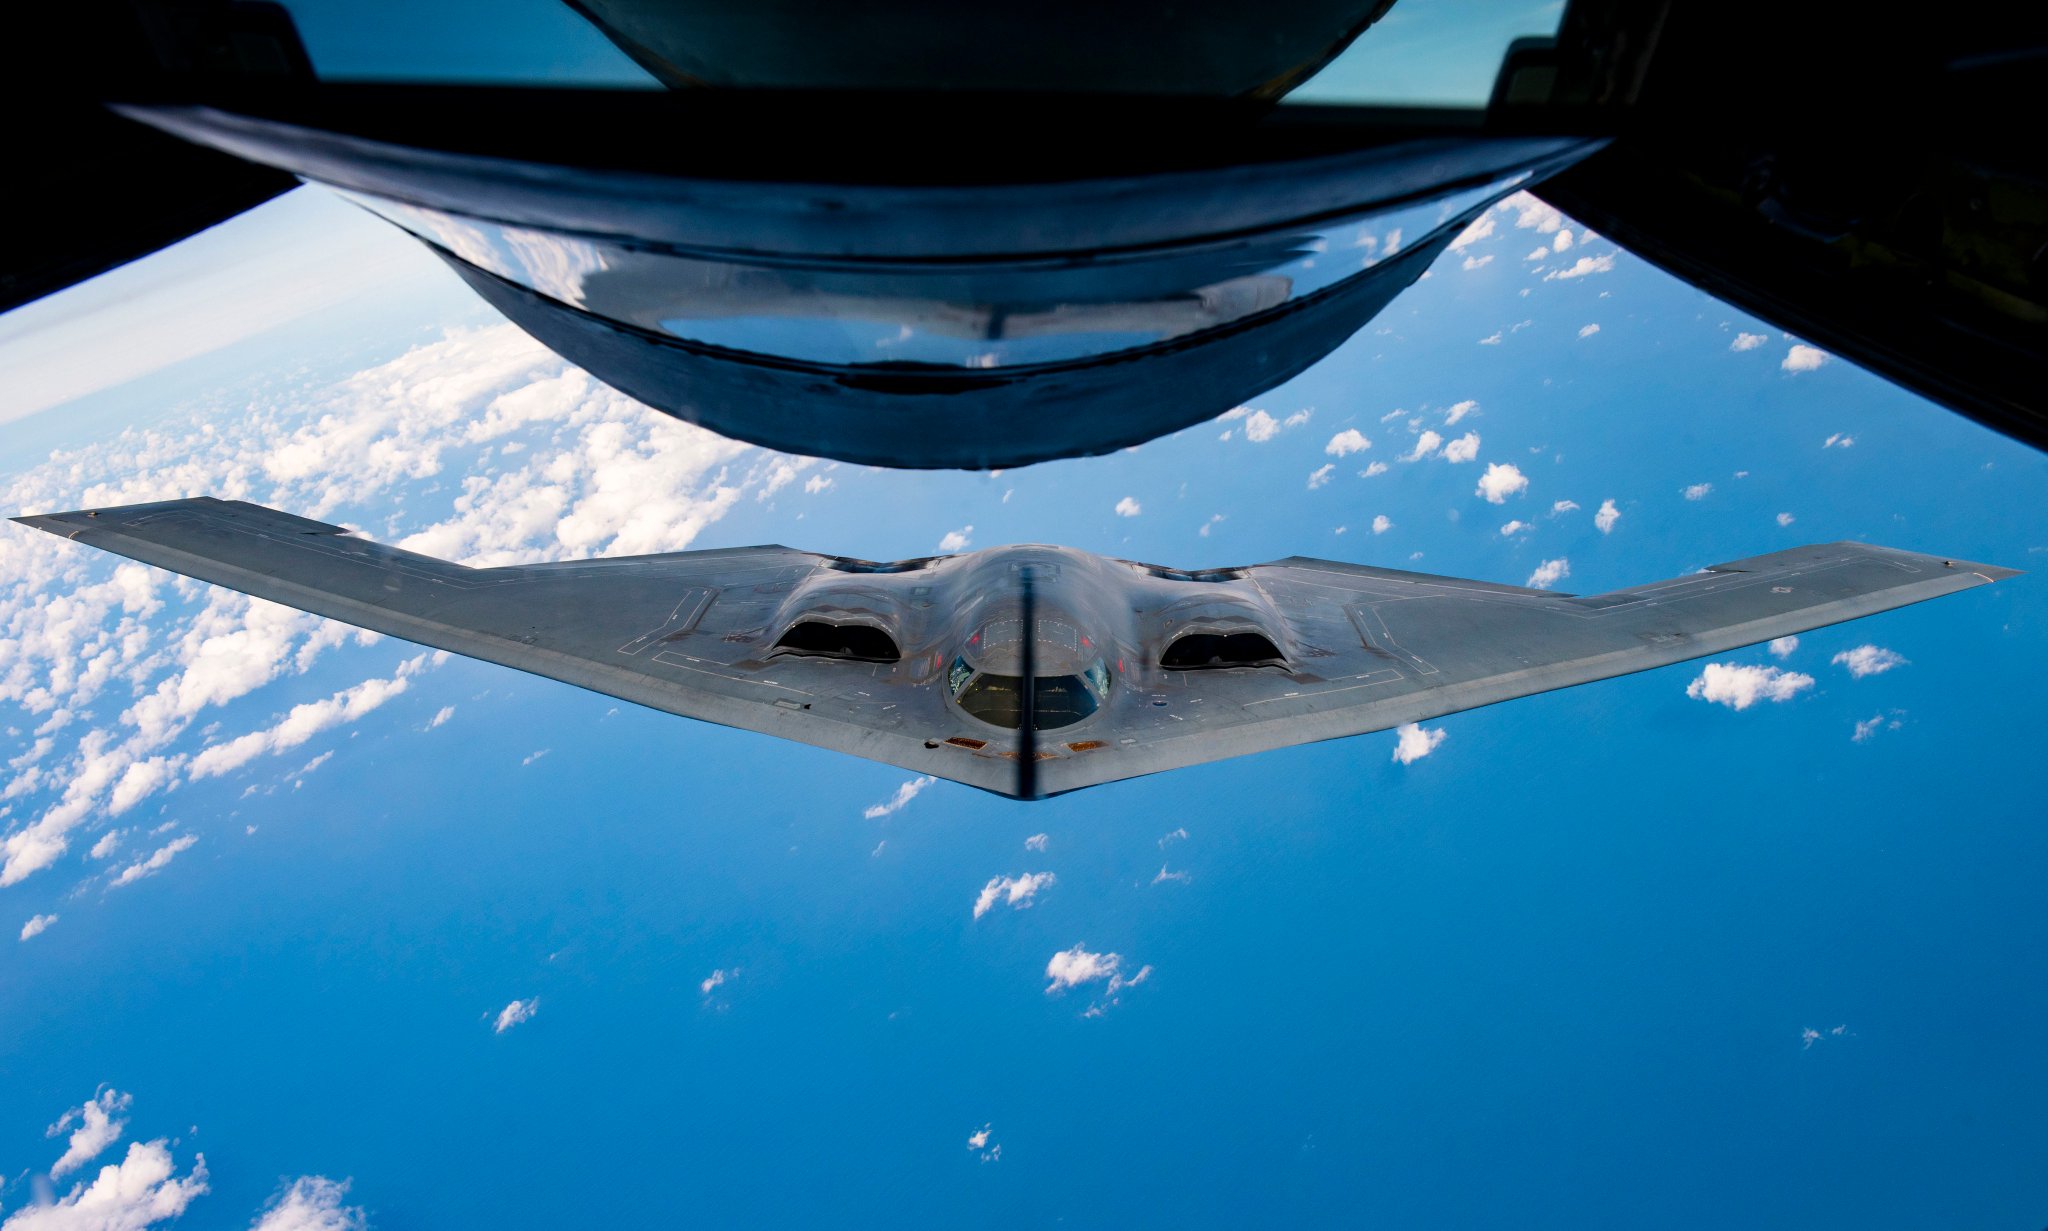 GEORGE ?? on Twitter: The B-2 and the Boom.The shadow from the boom of a KC-135 Stratotanker splits down the middle of the nose of a B-2 Spirit Stealth Bomber. Off to bed, see you all TOMORROW.… https://t.co/zIfEOLcC9X